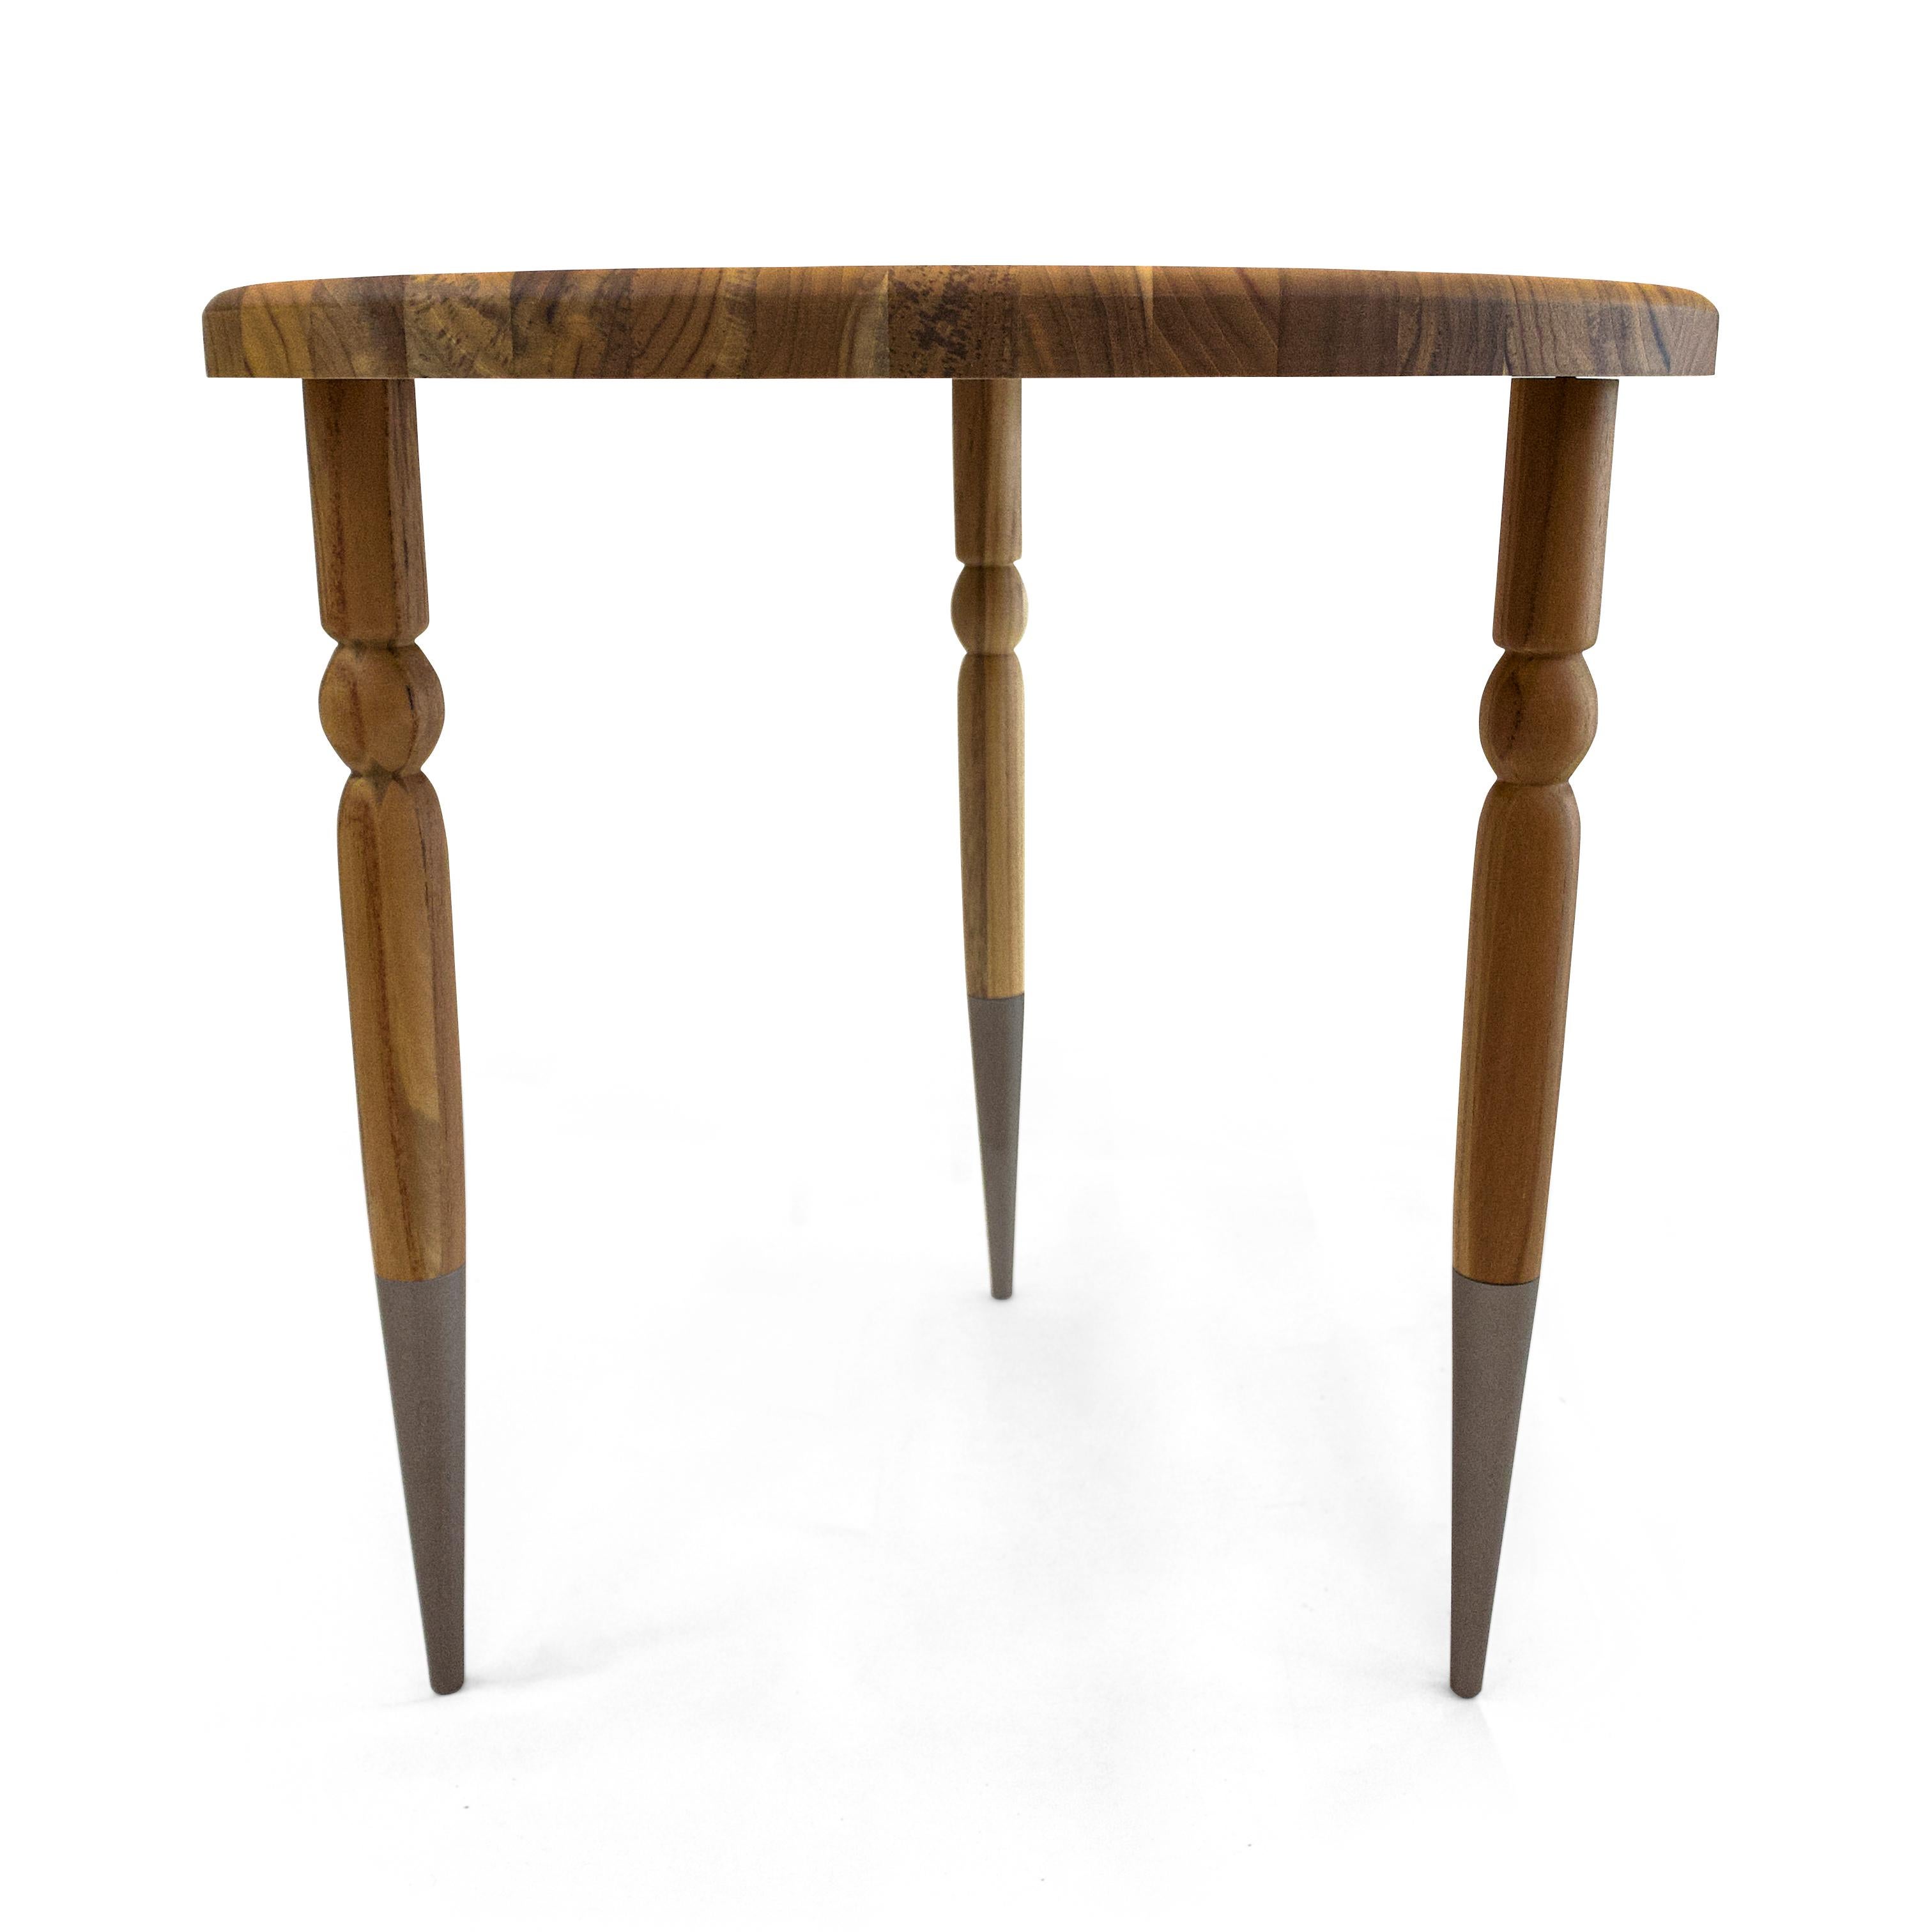 Palo Side Table in Teak Wood with Chocolate Turned Spindle Legs, Set of 3 For Sale 11